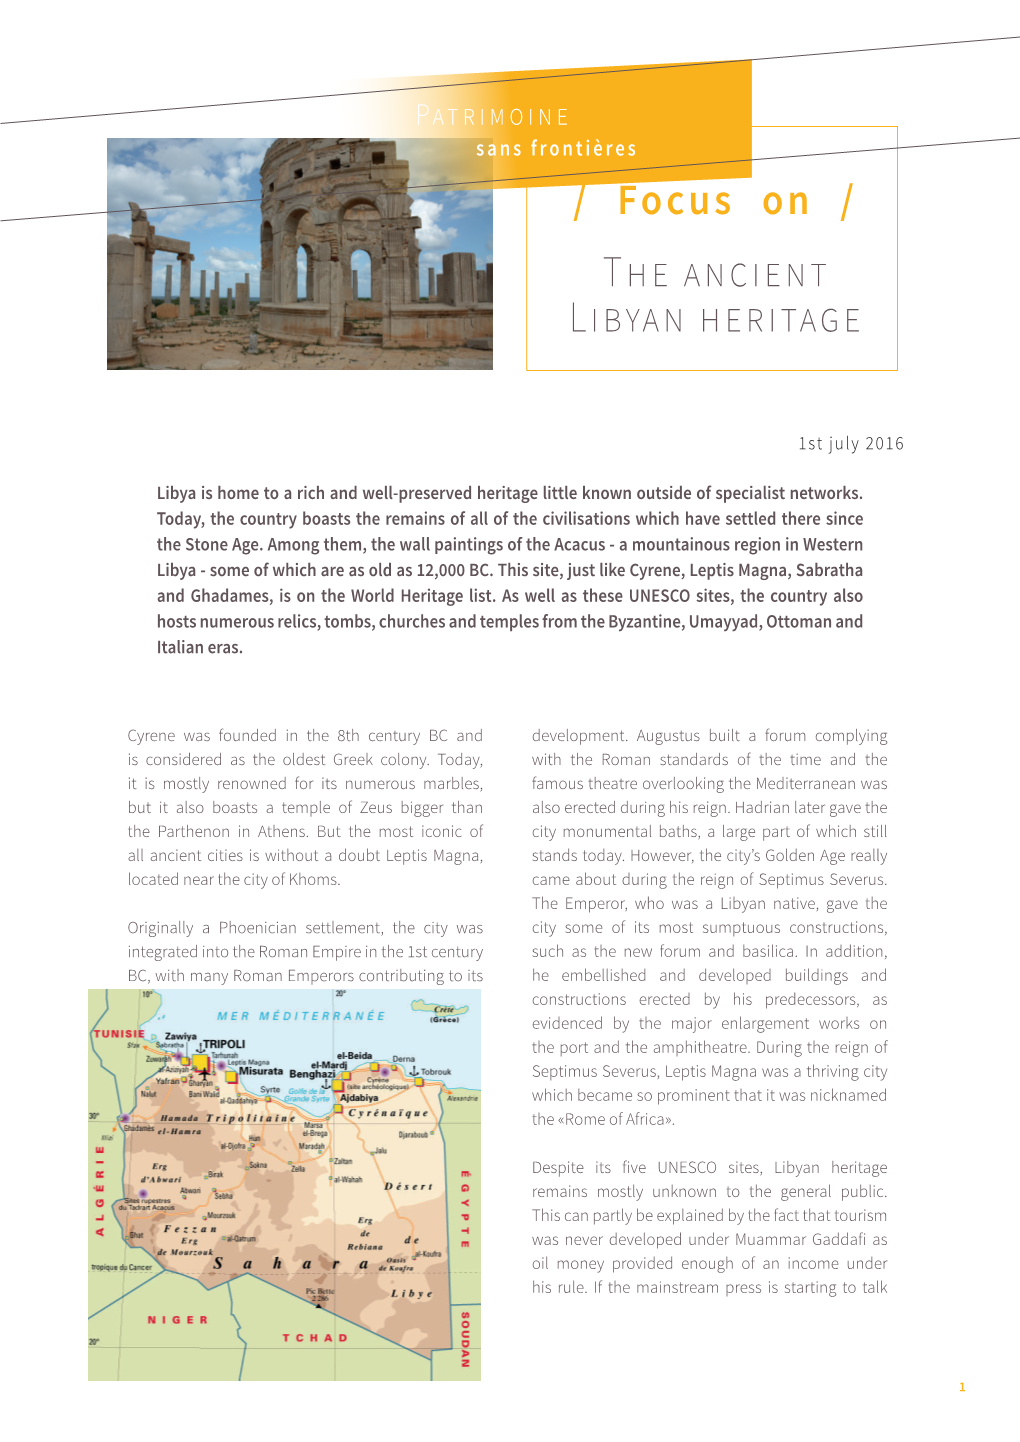 The Ancient Libyan Heritage